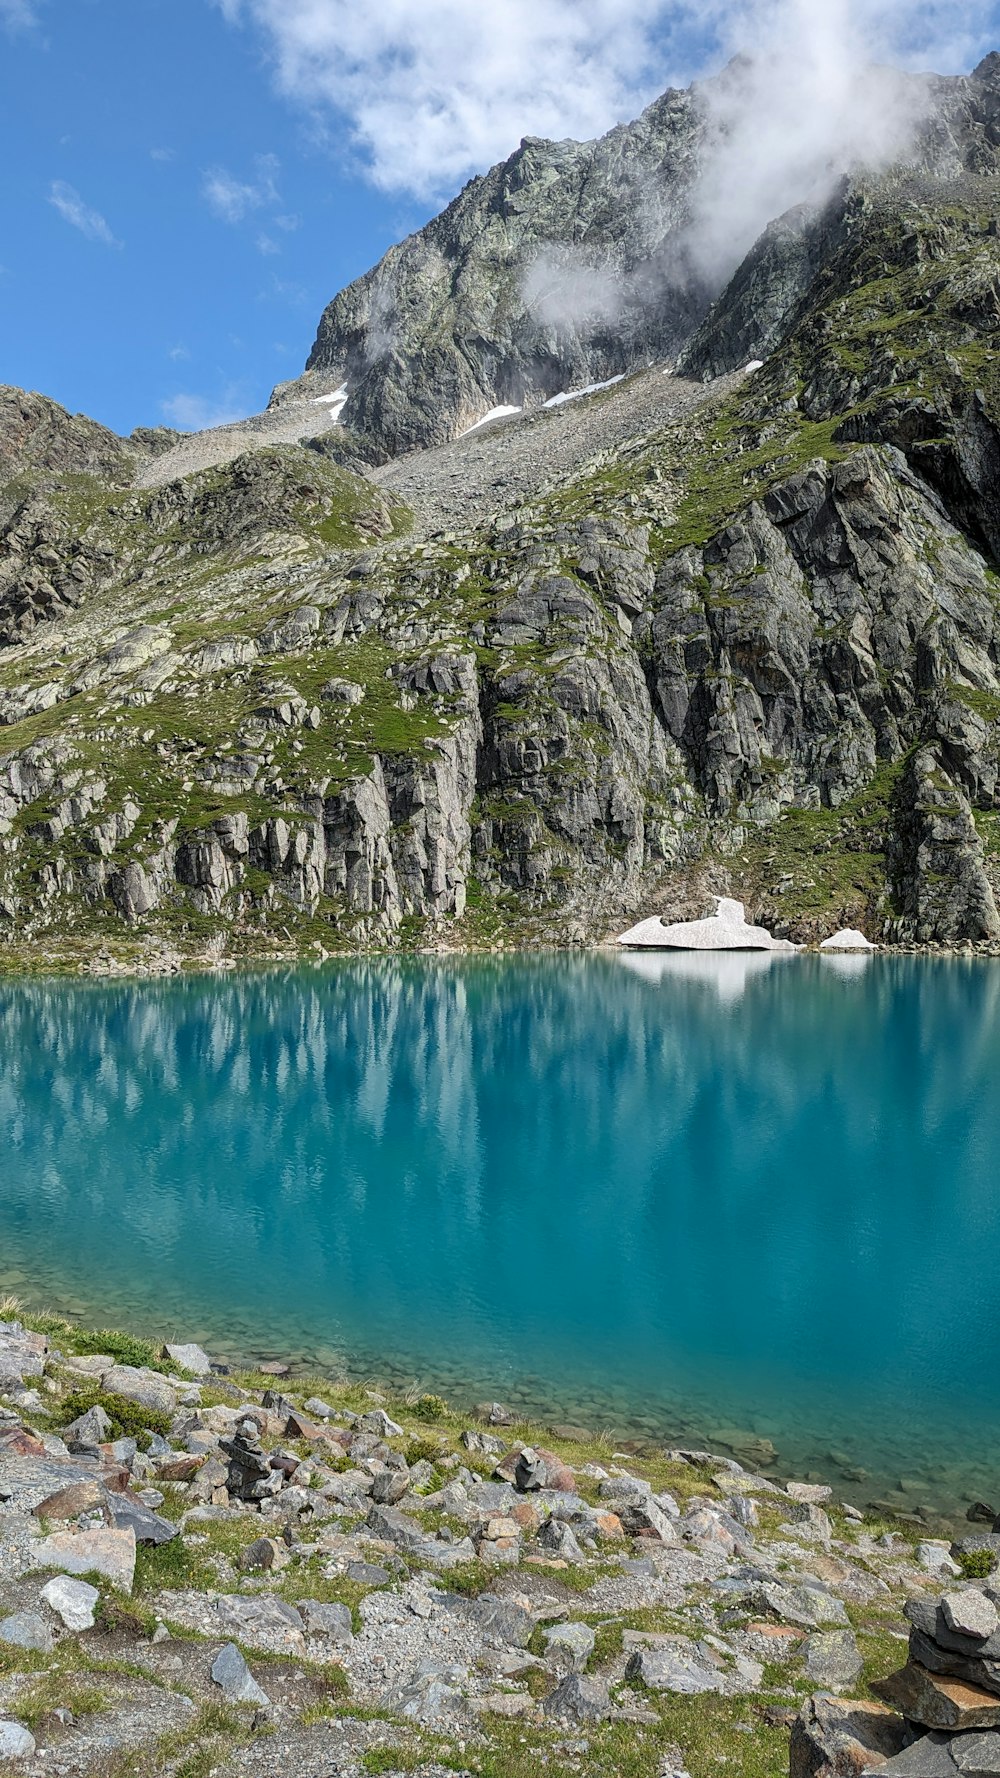 a blue lake surrounded by rocky mountains under a cloudy sky